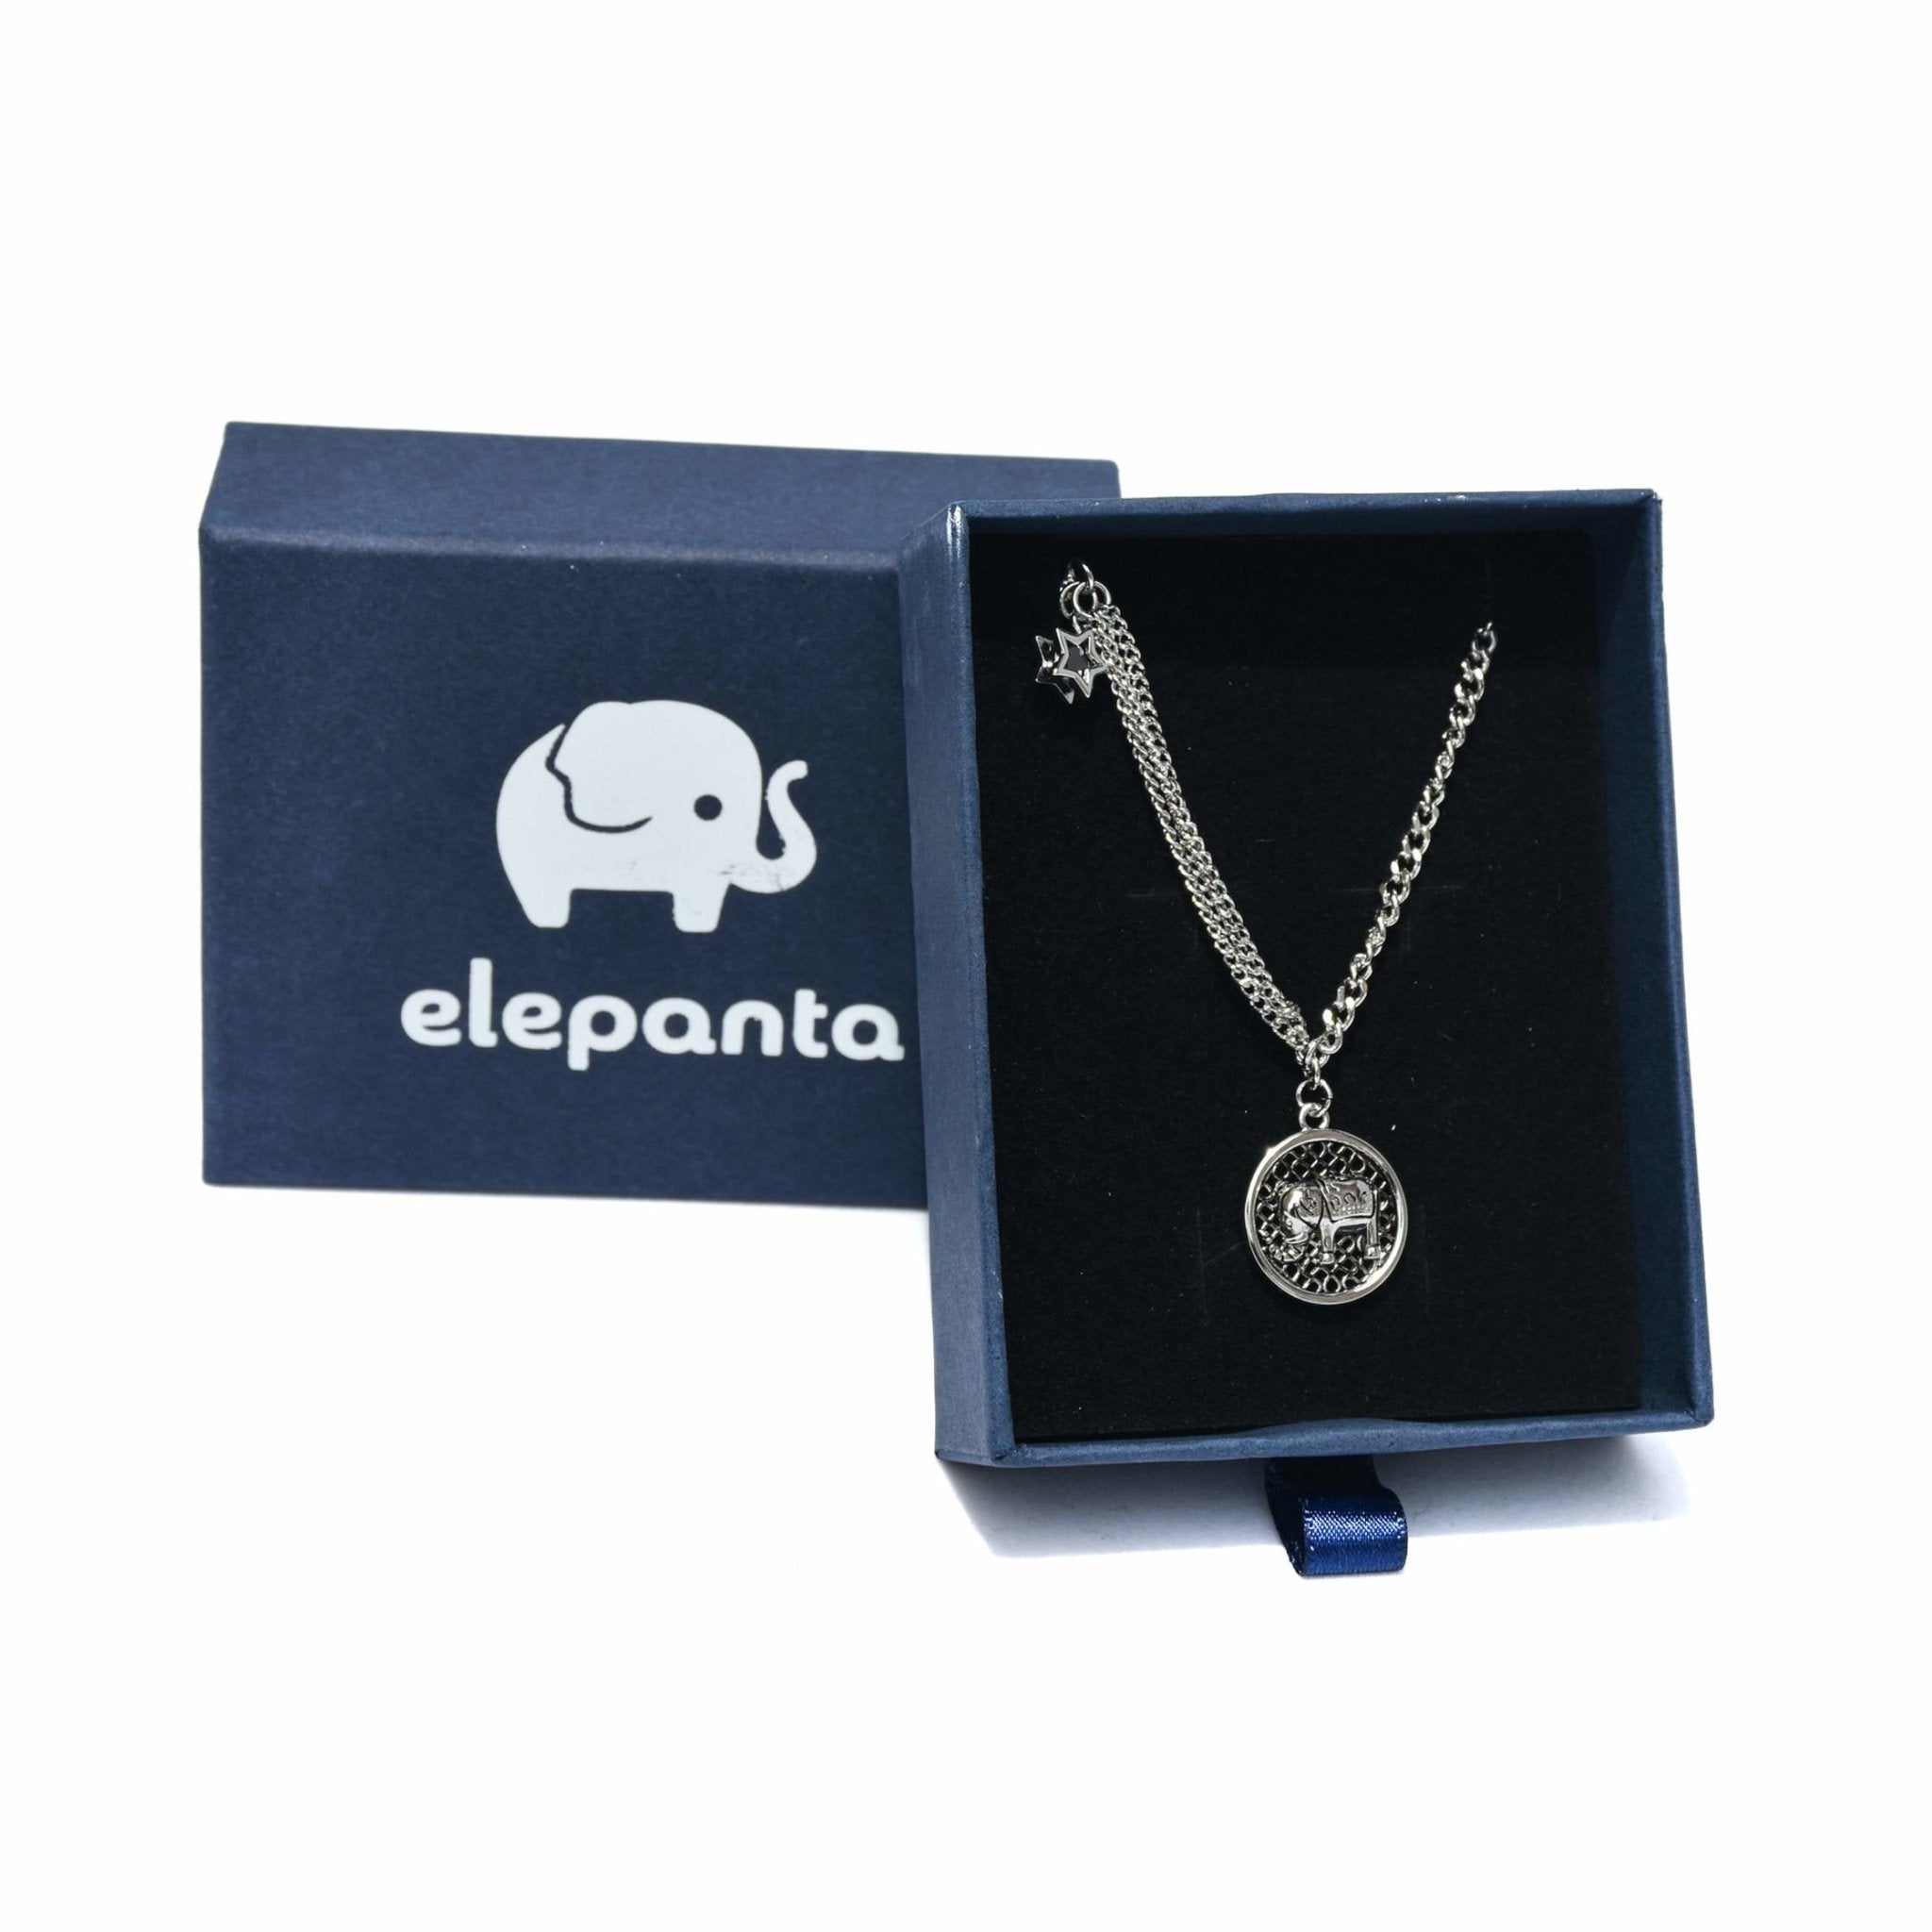 SAVANNA ELEPHANT NECKLACE Elepanta Necklaces - Buy Today Elephant Pants Jewelry And Bohemian Clothes Handmade In Thailand Help To Save The Elephants FairTrade And Vegan